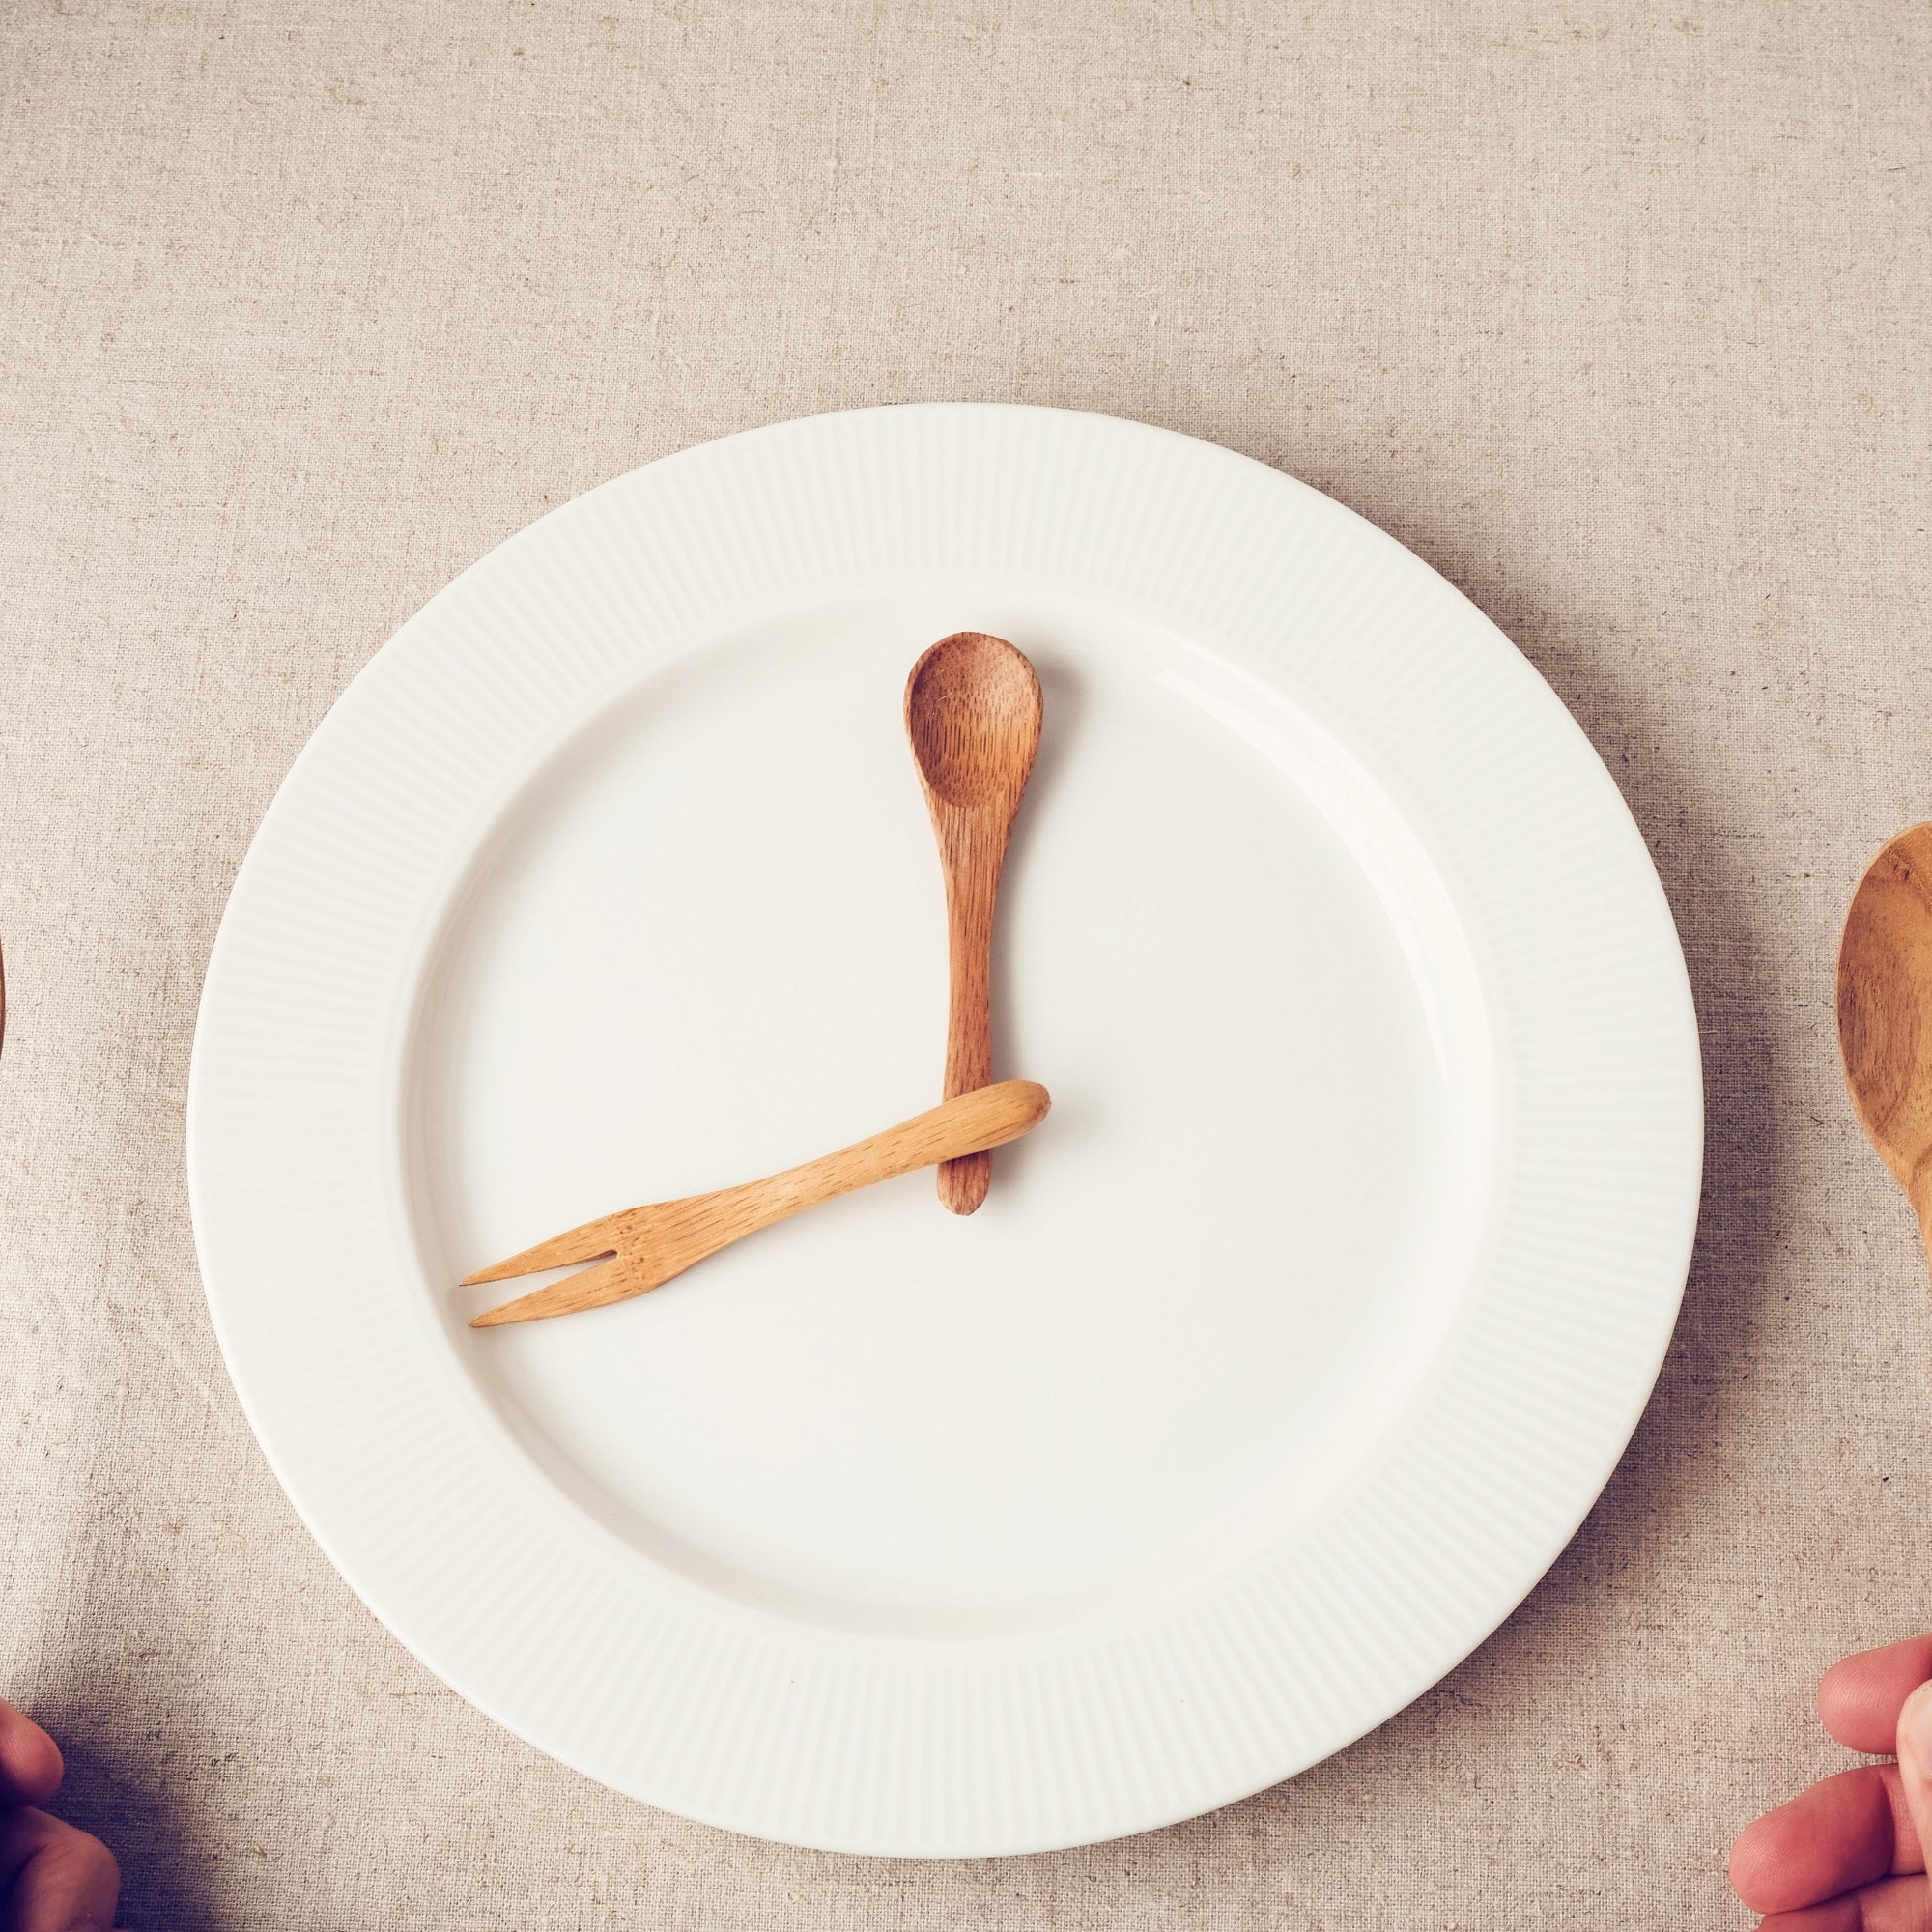 The Skinny on Intermittent Fasting